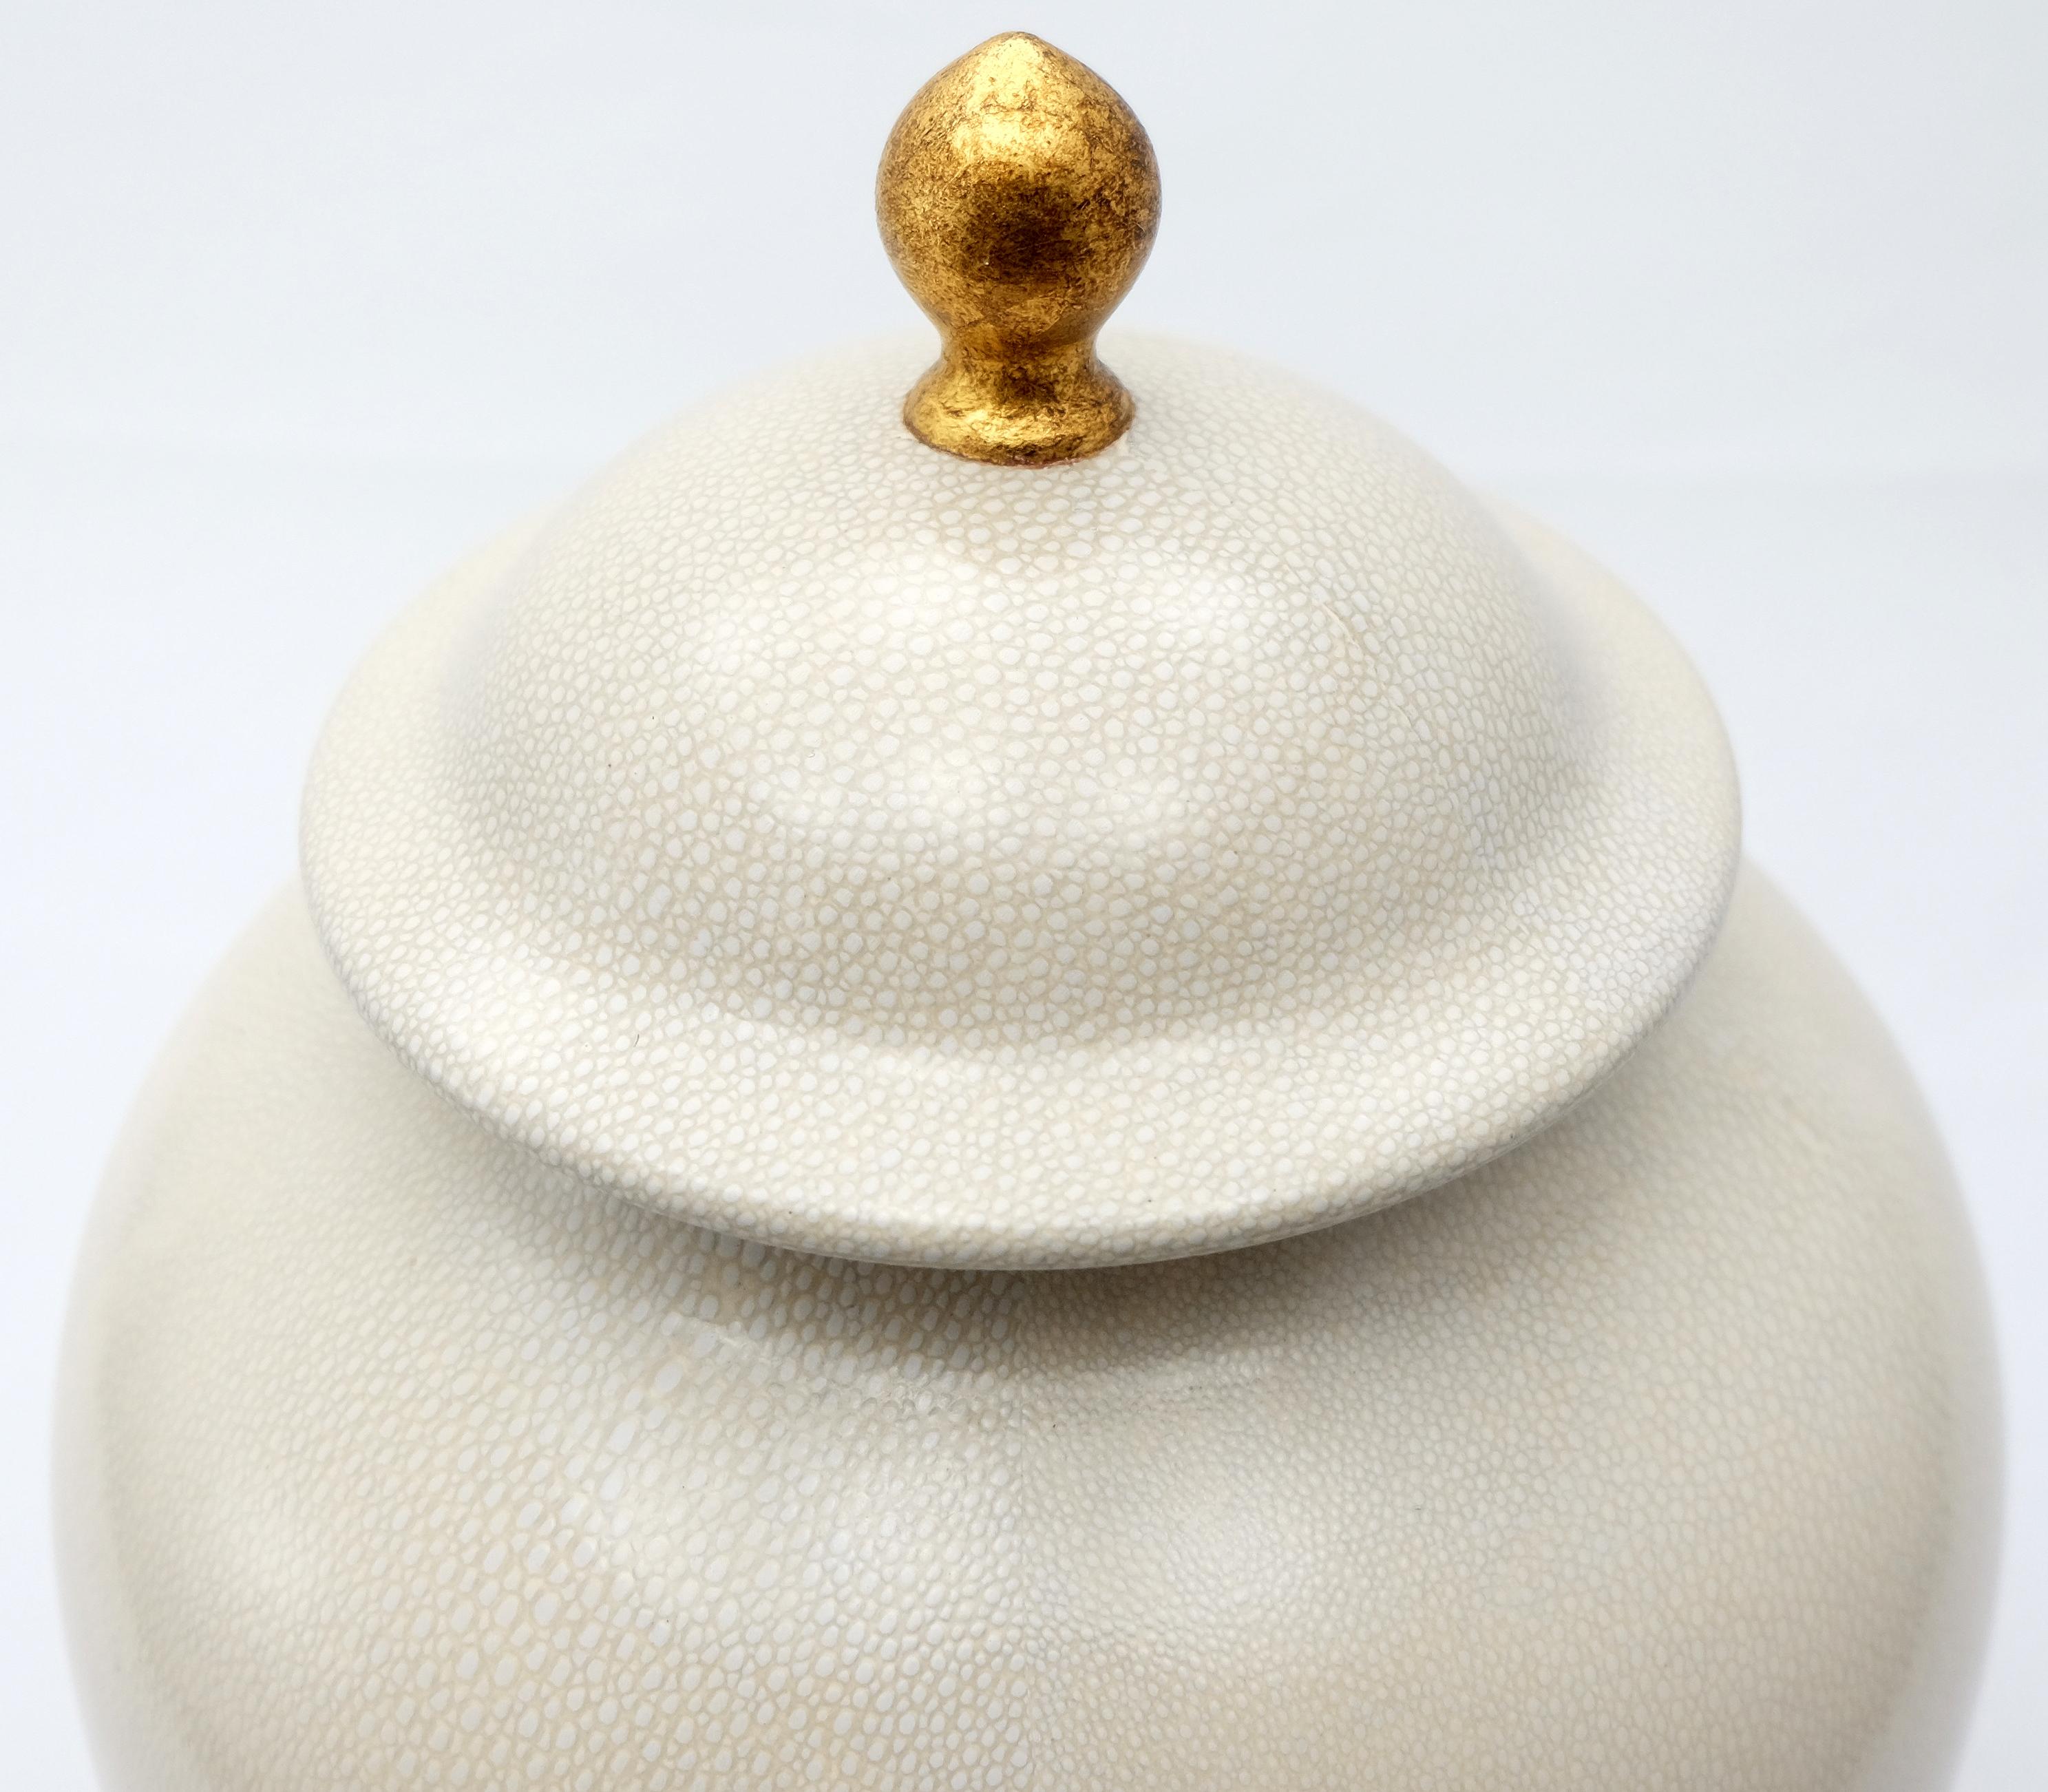 Paolo Marioni Large Italian Glazed Ceramic Jar with Gold-Leaf Accents For Sale 1